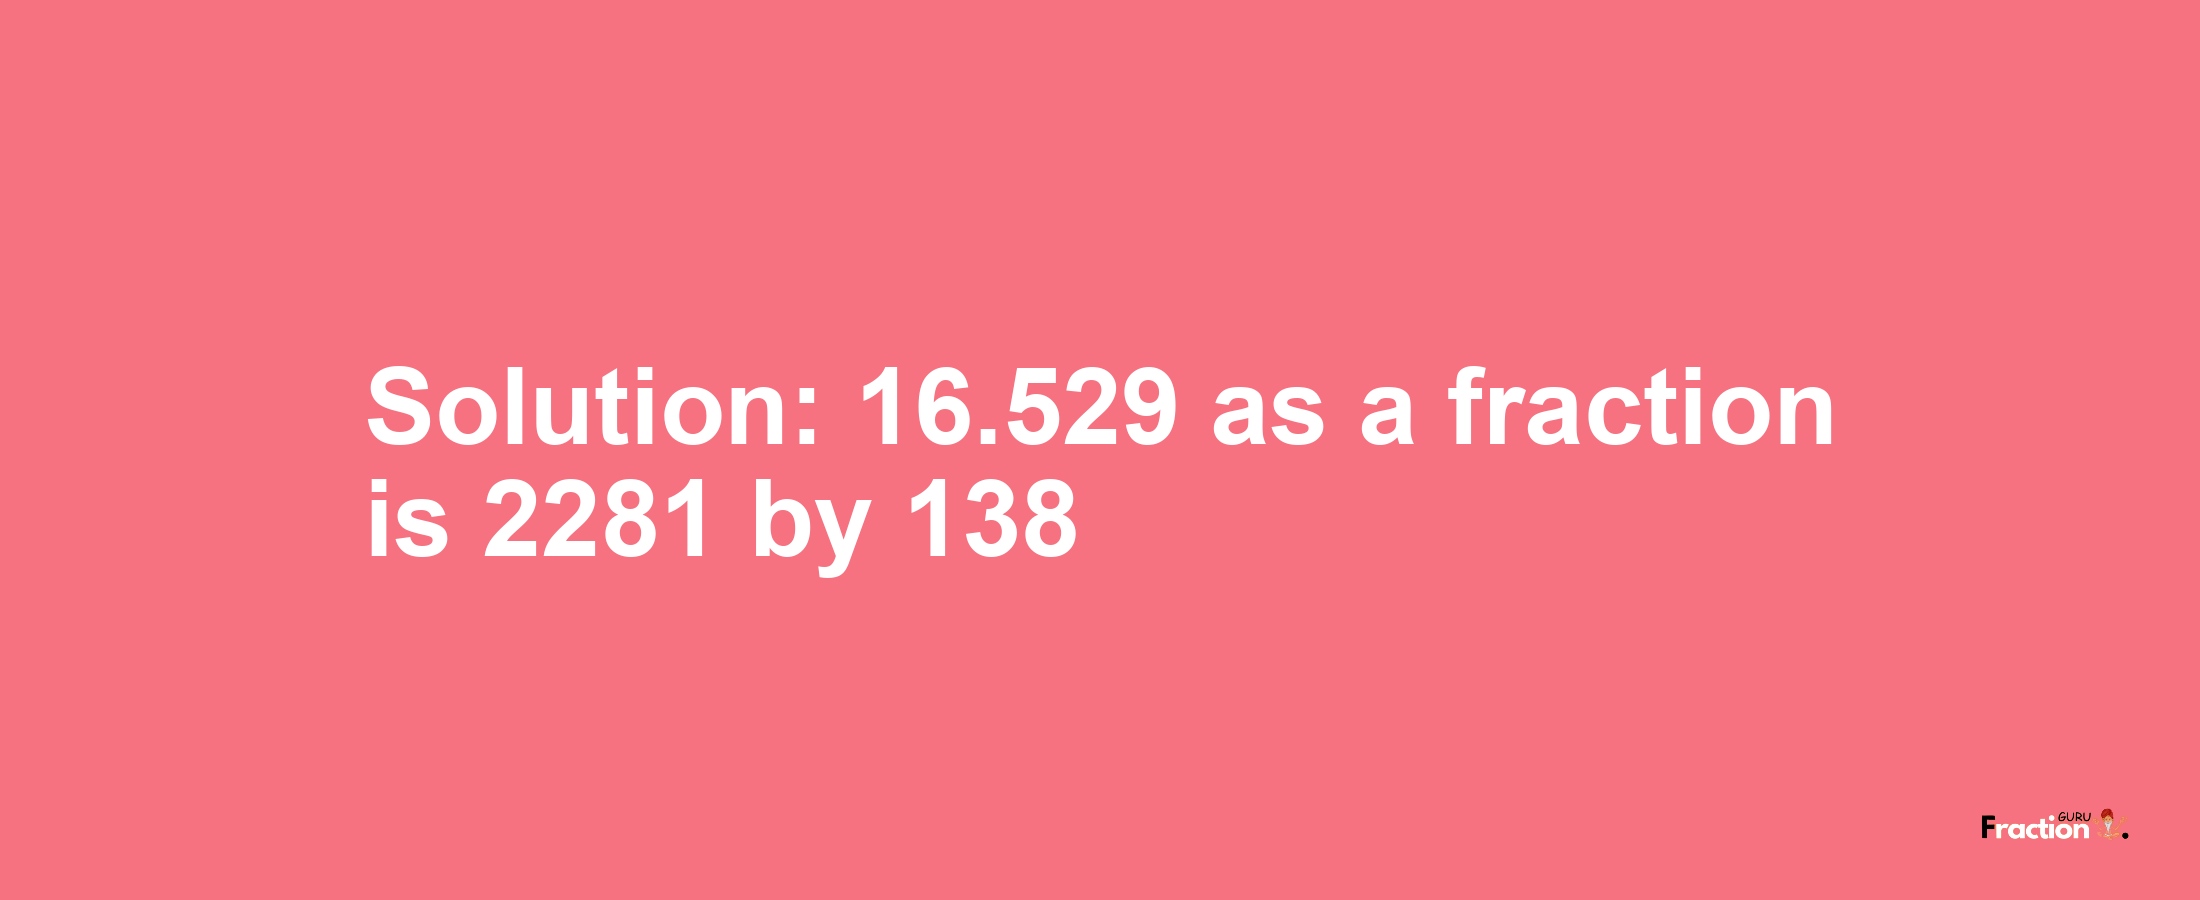 Solution:16.529 as a fraction is 2281/138